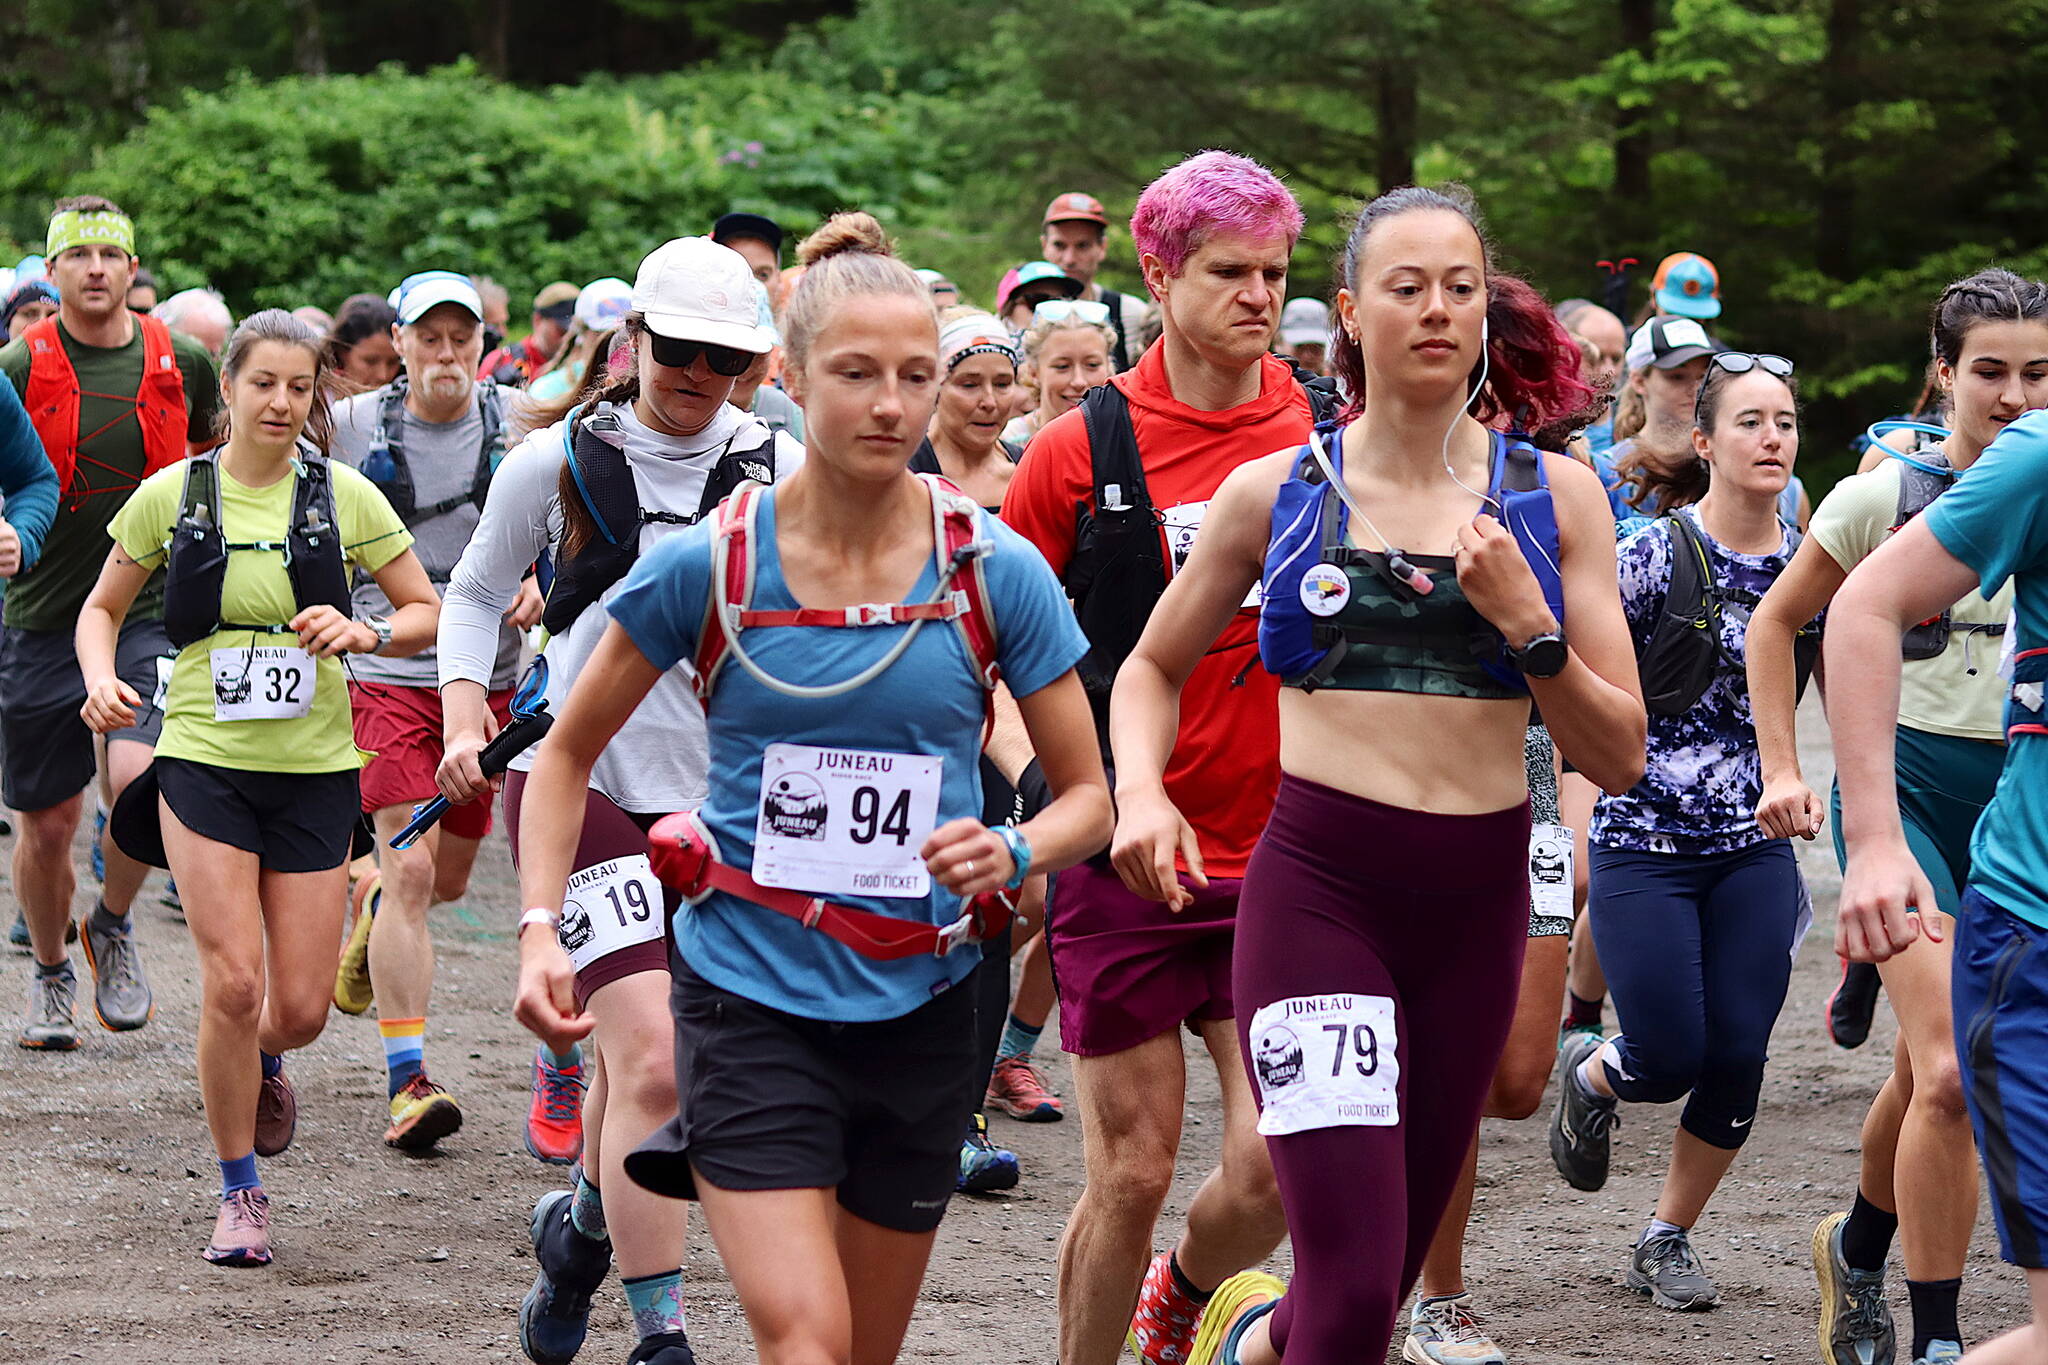 A total of 135 runners set out from the starting line of the Juneau Ridge Race at Cope Park on Sunday. The 15-mile race course went to the top of Mount Juneau and along the ridge before returning to the park. (Mark Sabbatini / Juneau Empire)